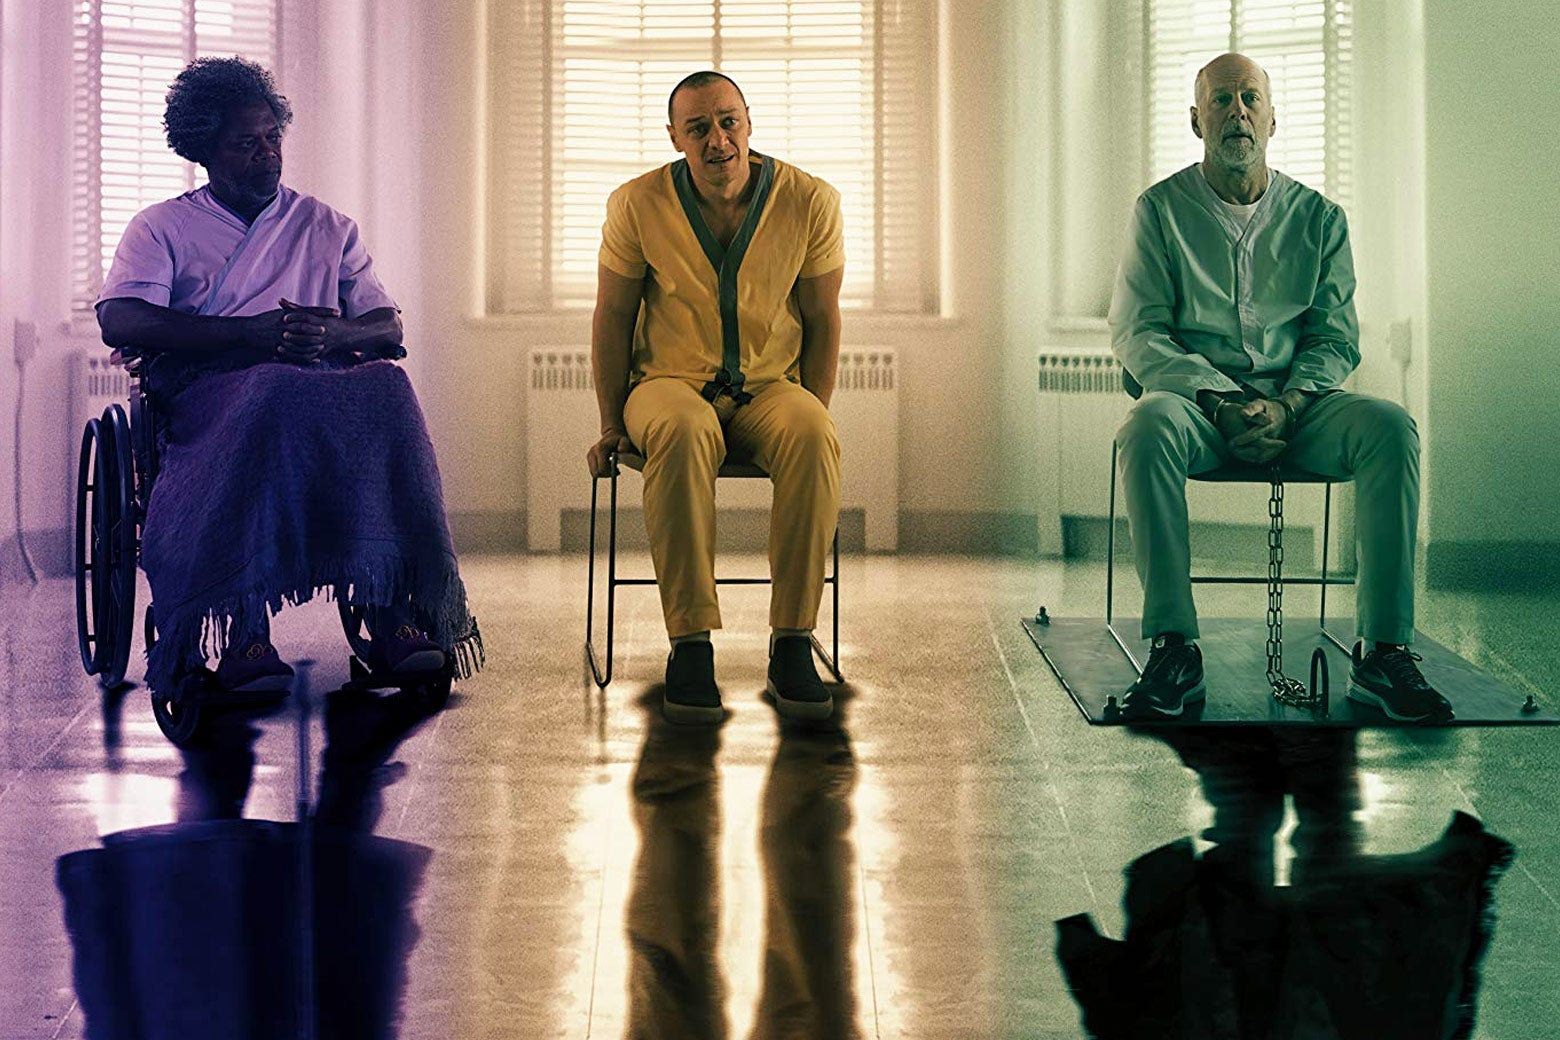 Bruce Willis, Samuel L. Jackson, and James McAvoy in Glass. The three men are seated next to each other in what appears to be a mental hospital.